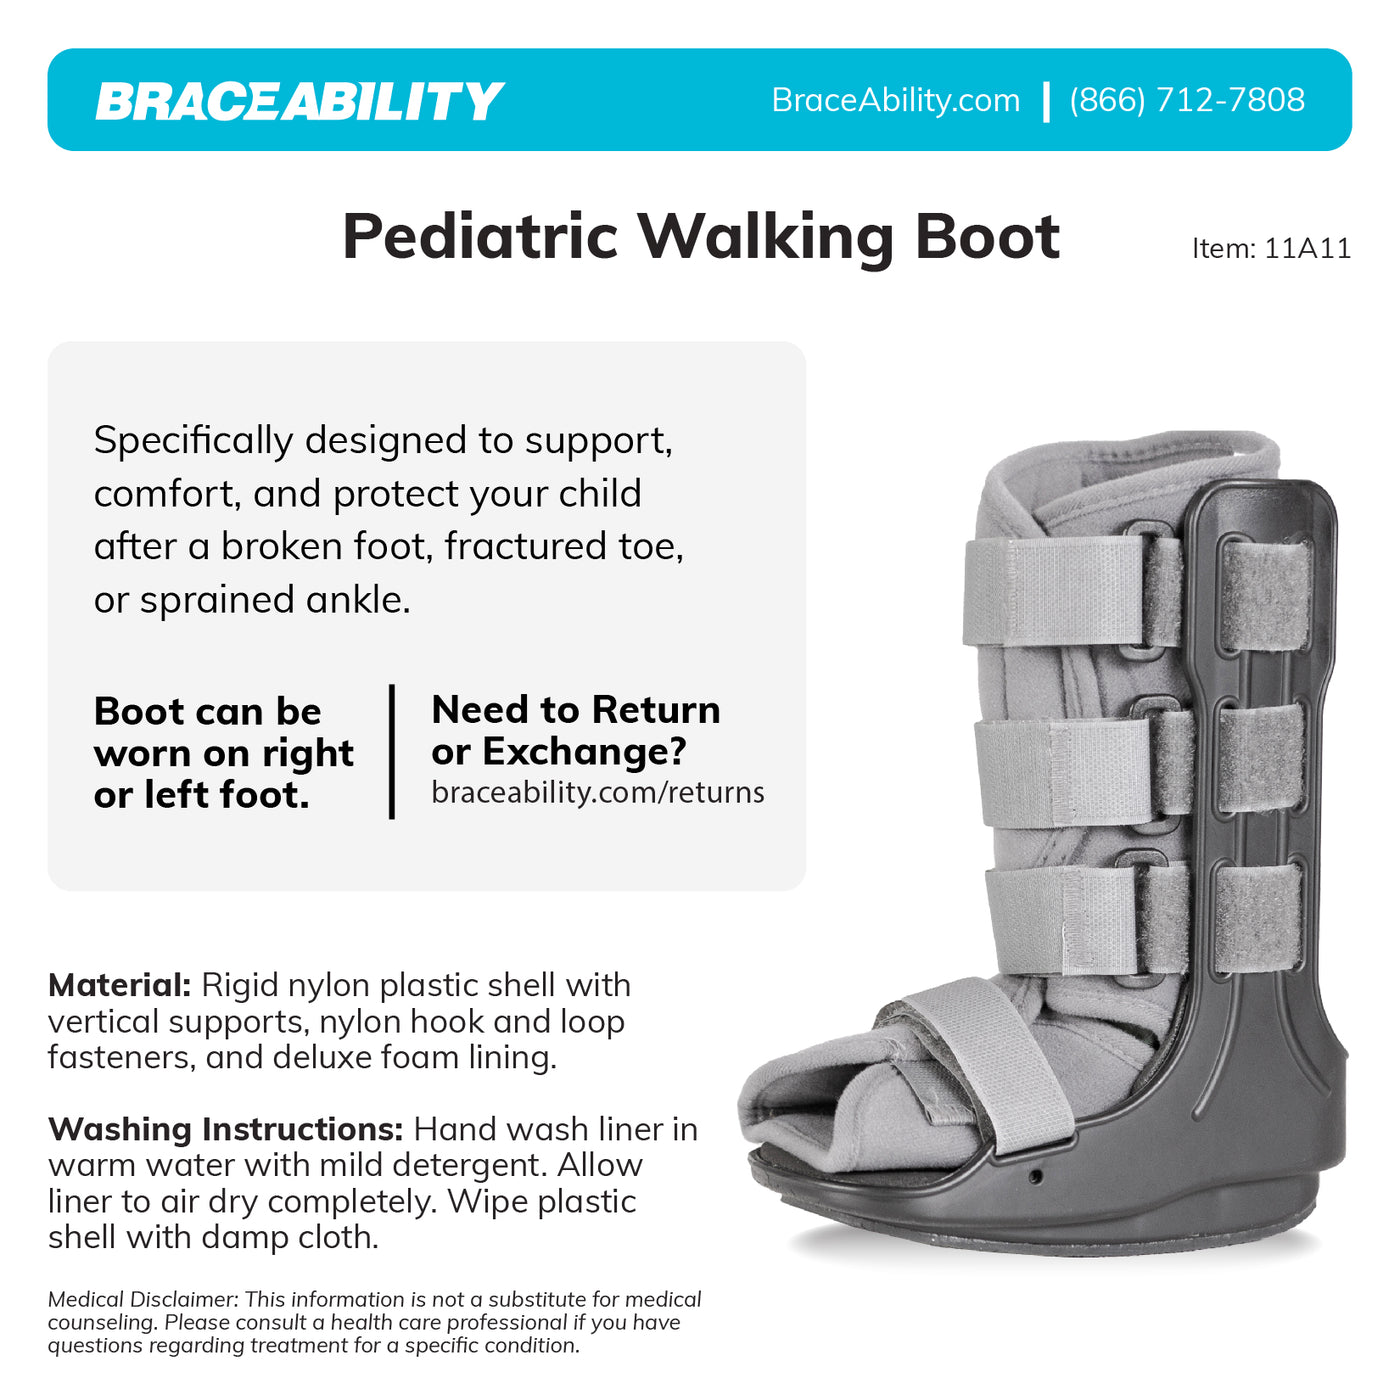 Tips For Selecting a Medical Walking Boot - and our list of Top